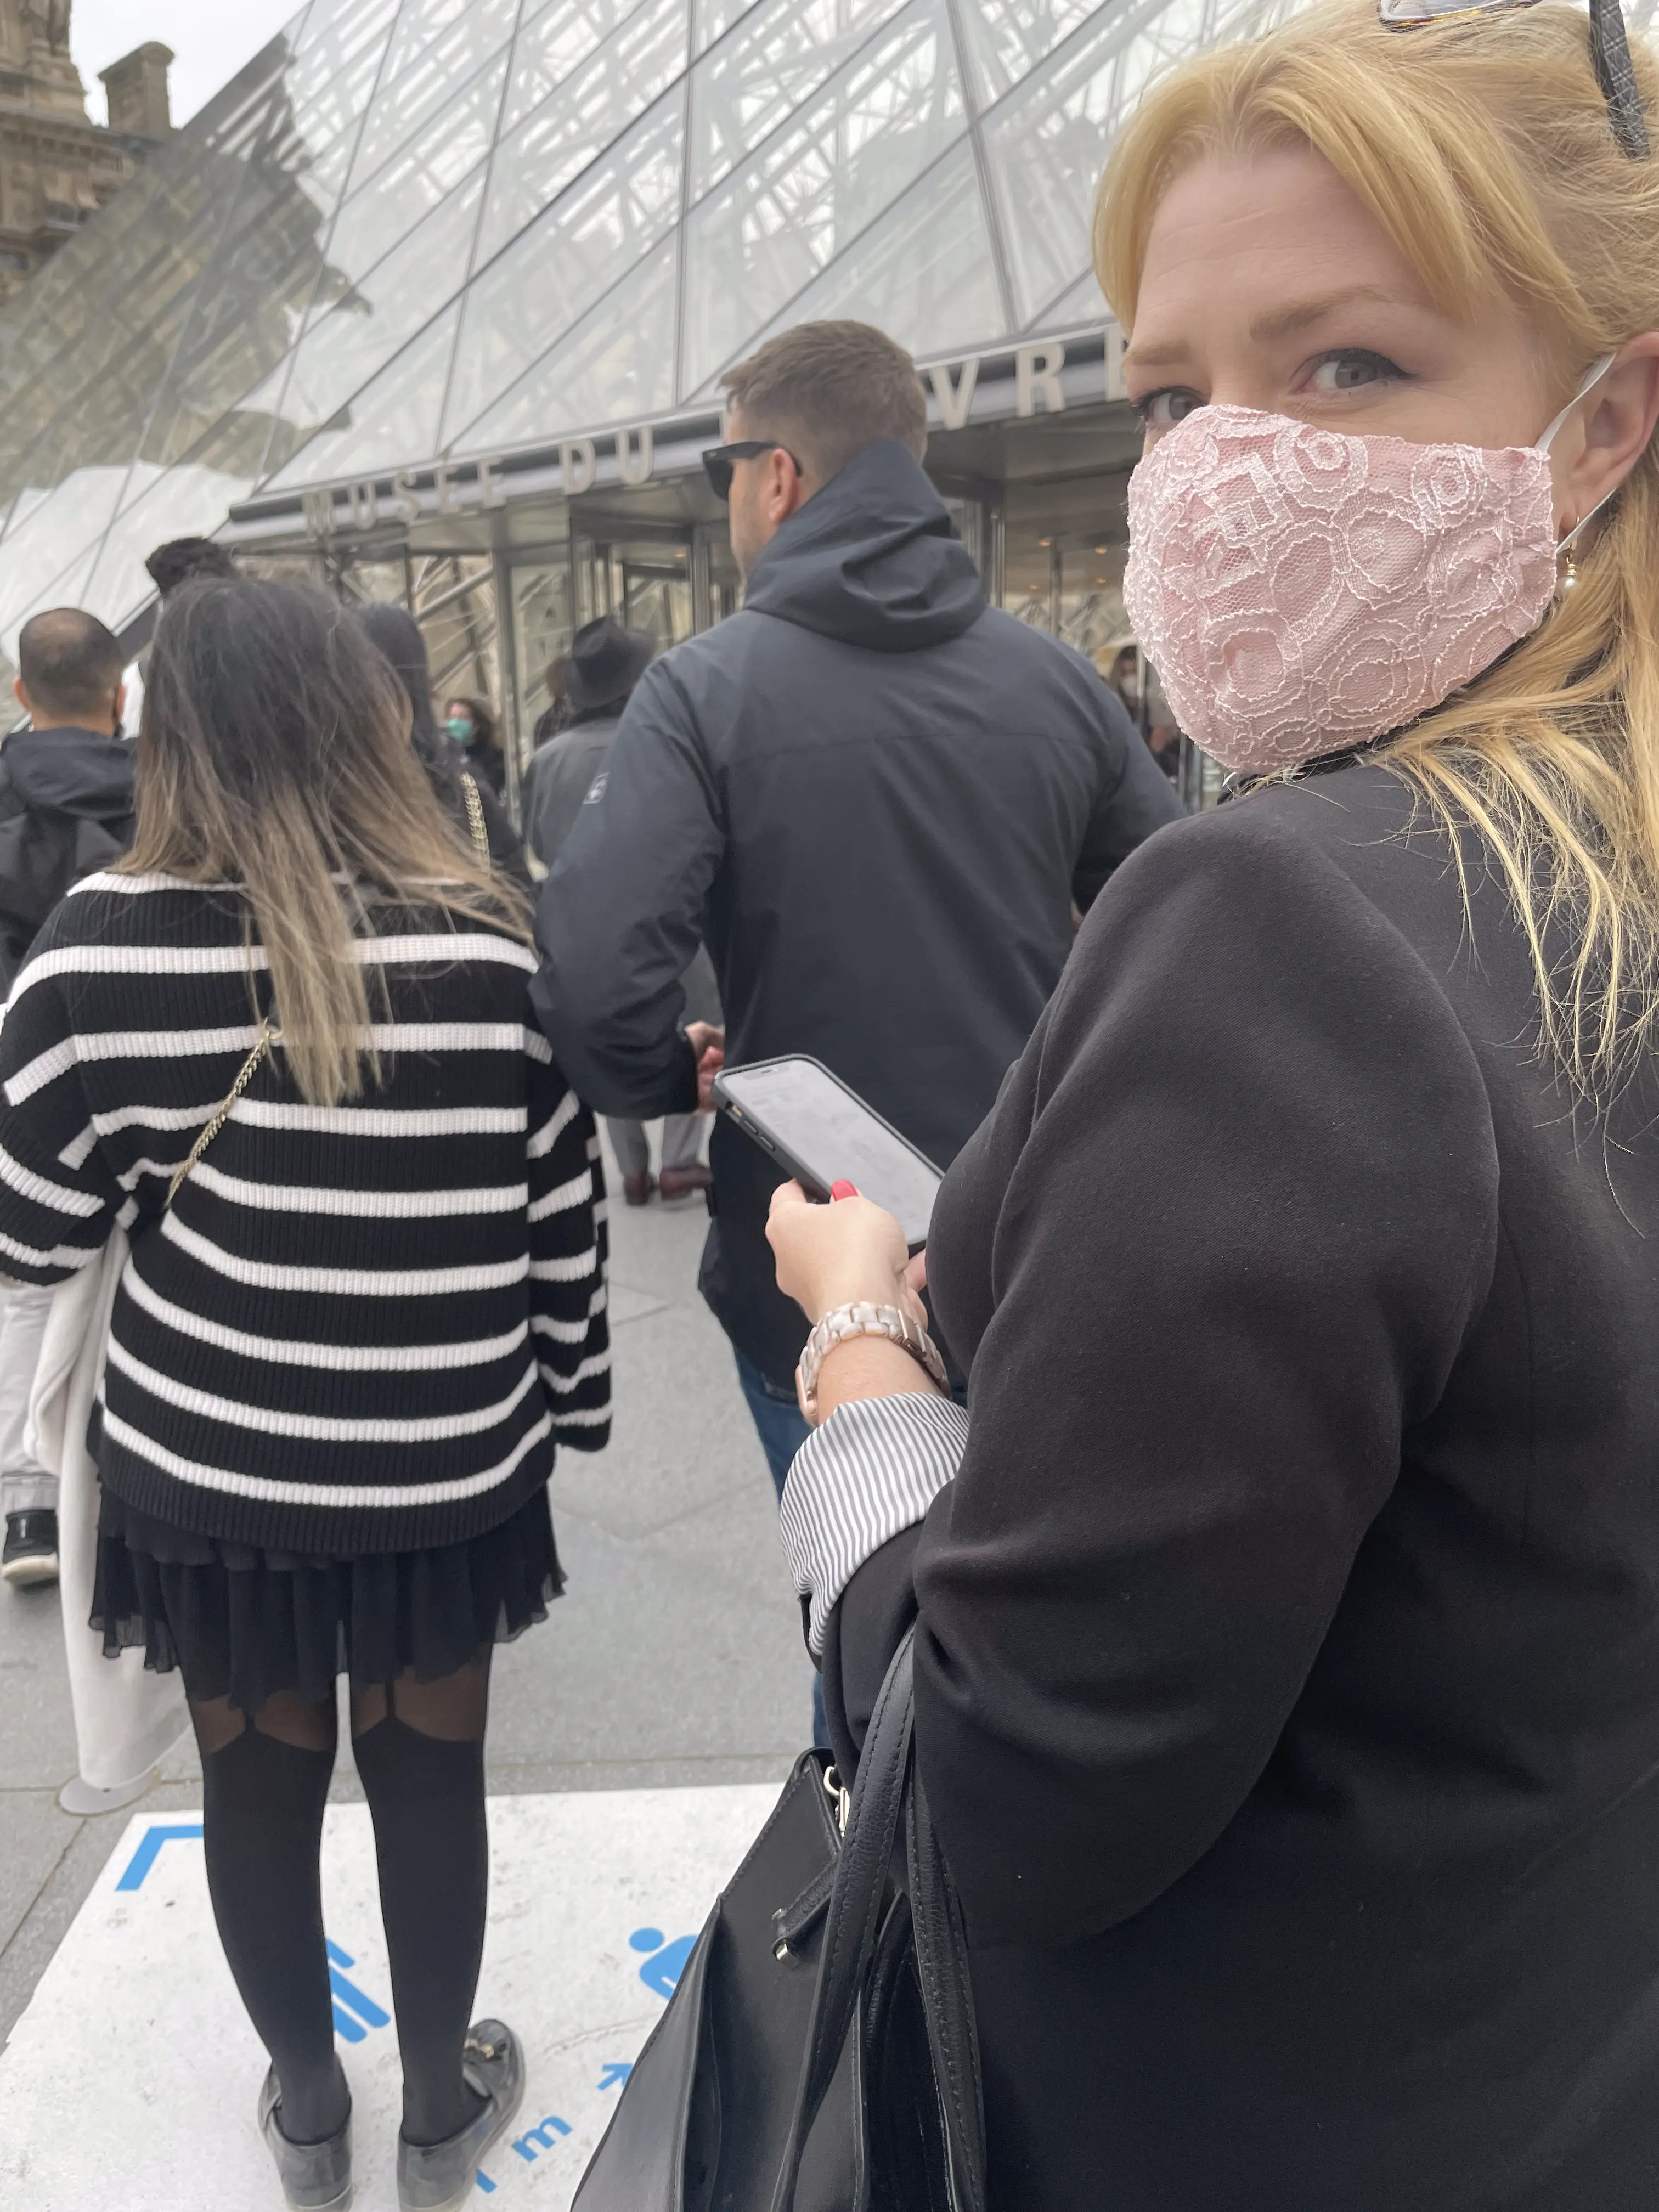 In line for our slot at the Louvre: masked with _pass sanitaire_ at the ready